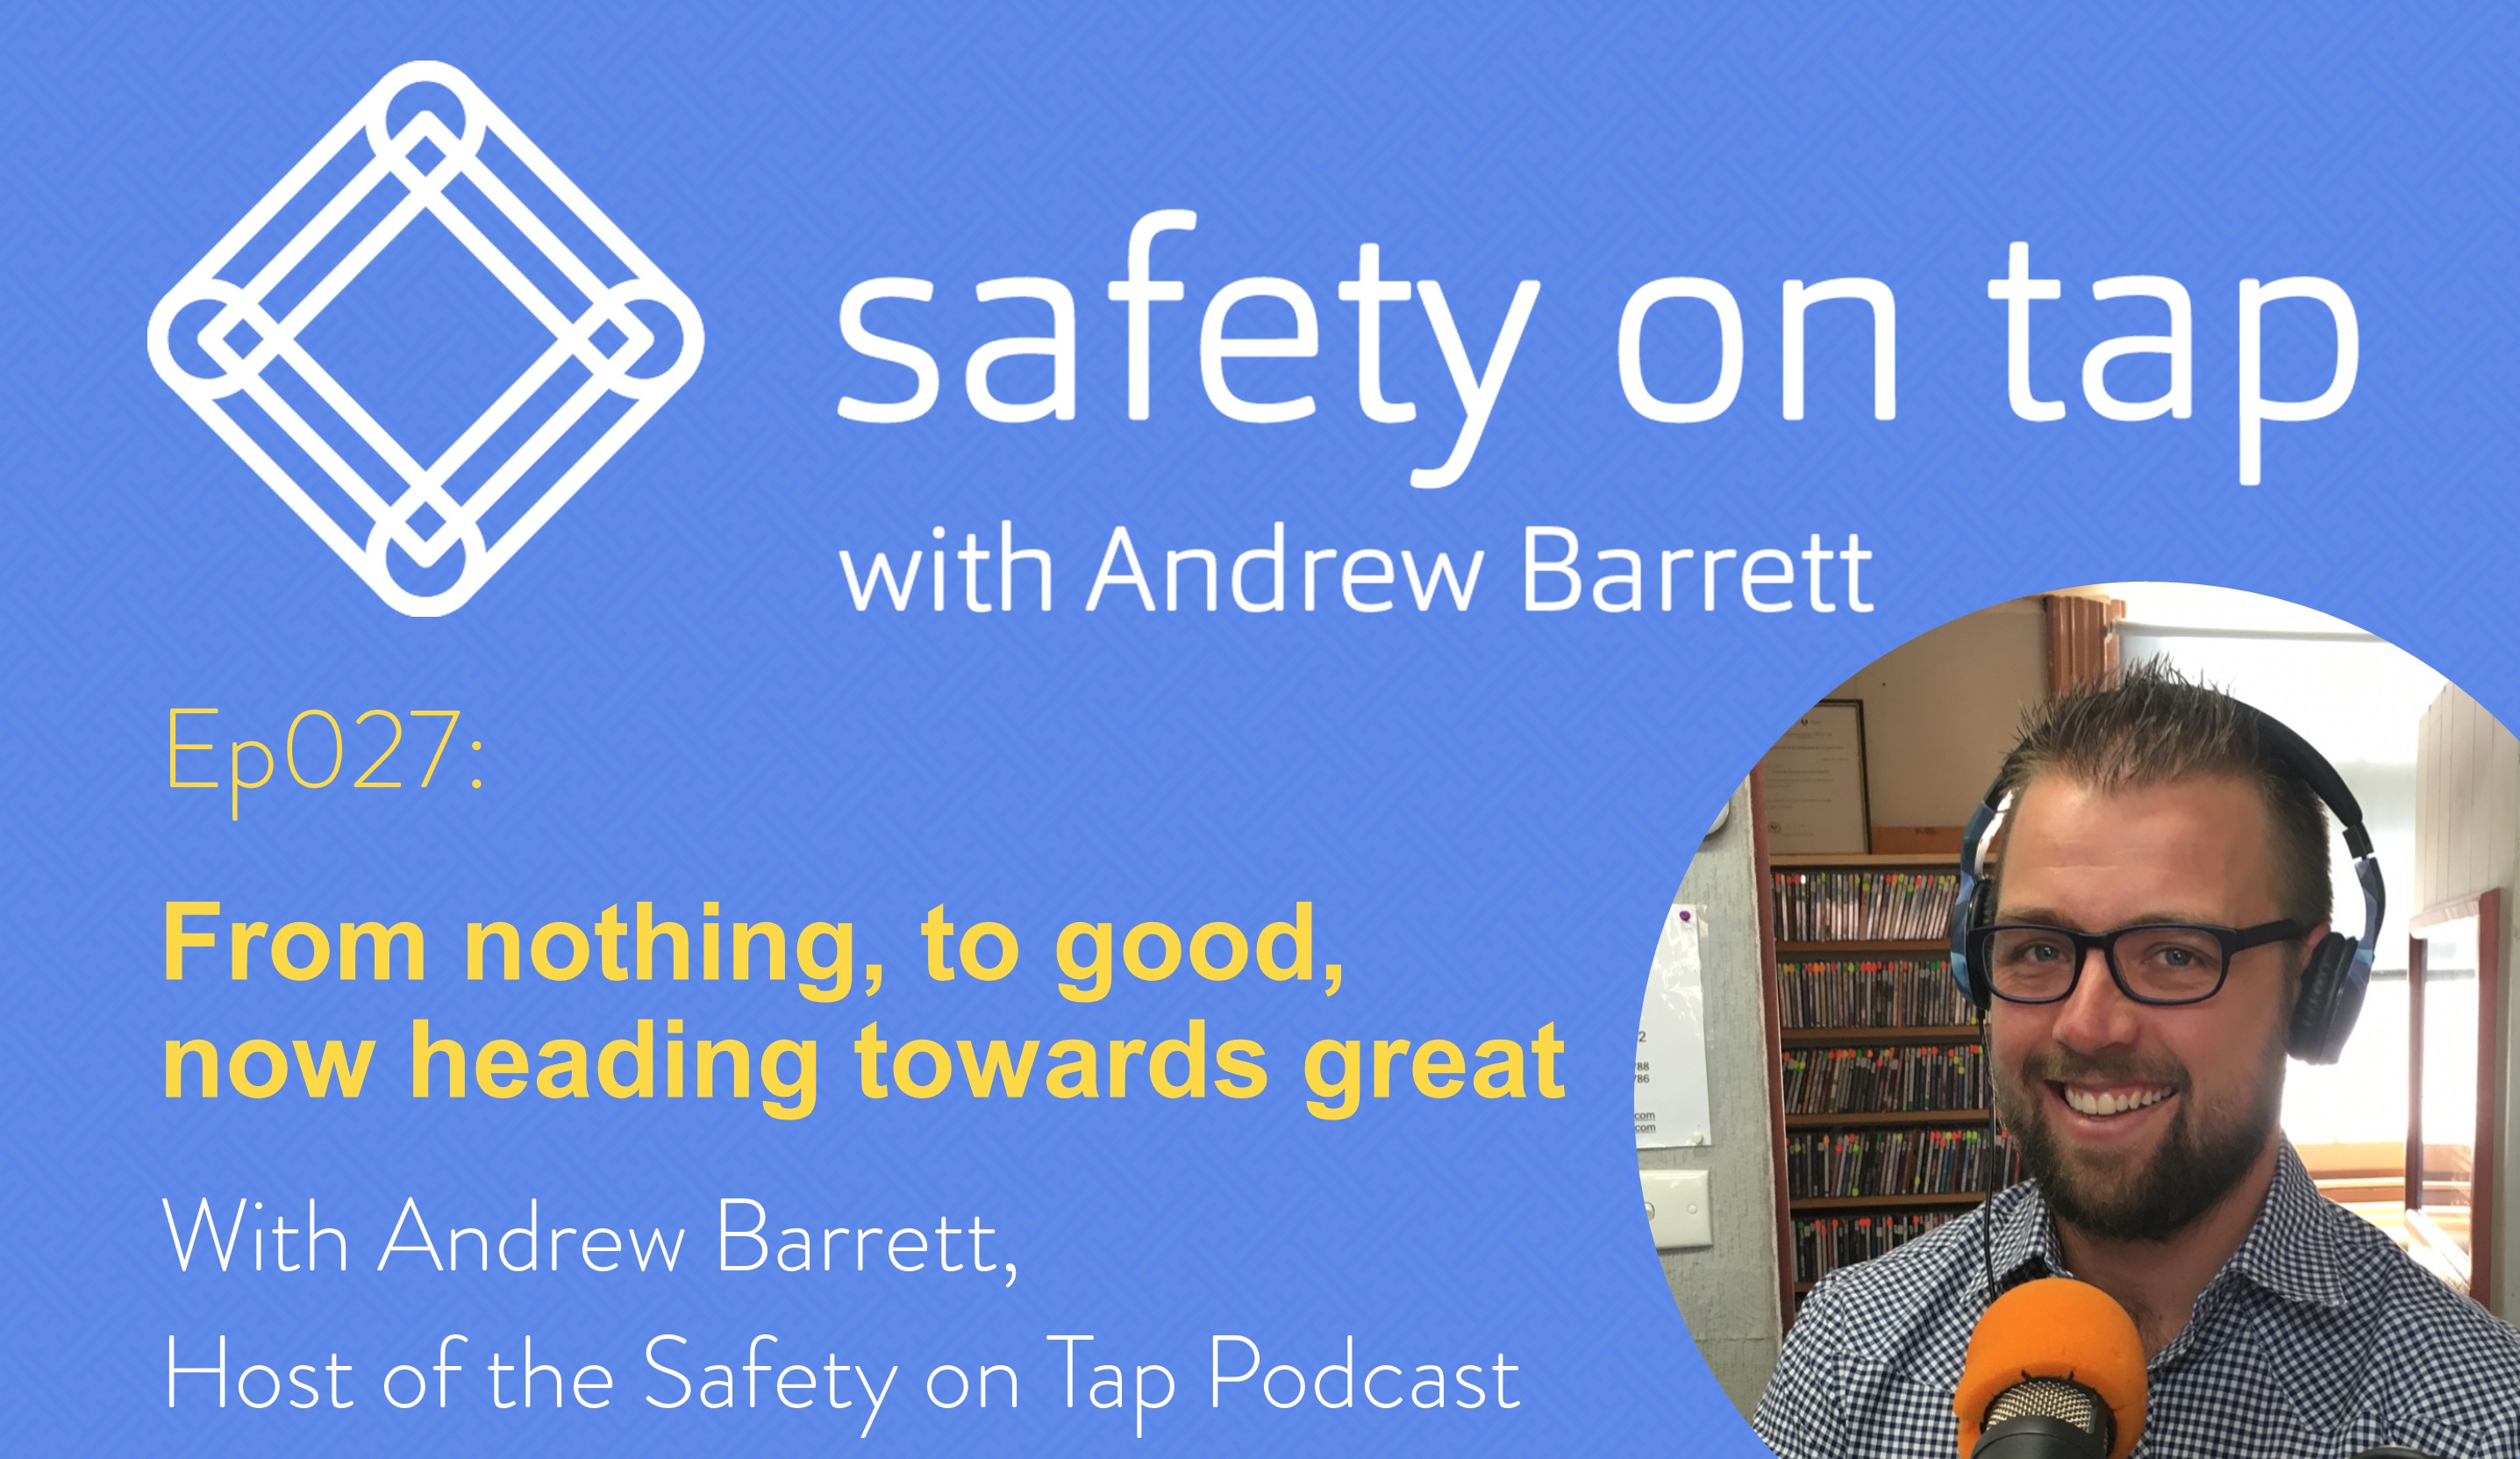 Ep027: From nothing, to good, now heading towards great.  With Andrew Barrett, Host of the Safety on Tap Podcast